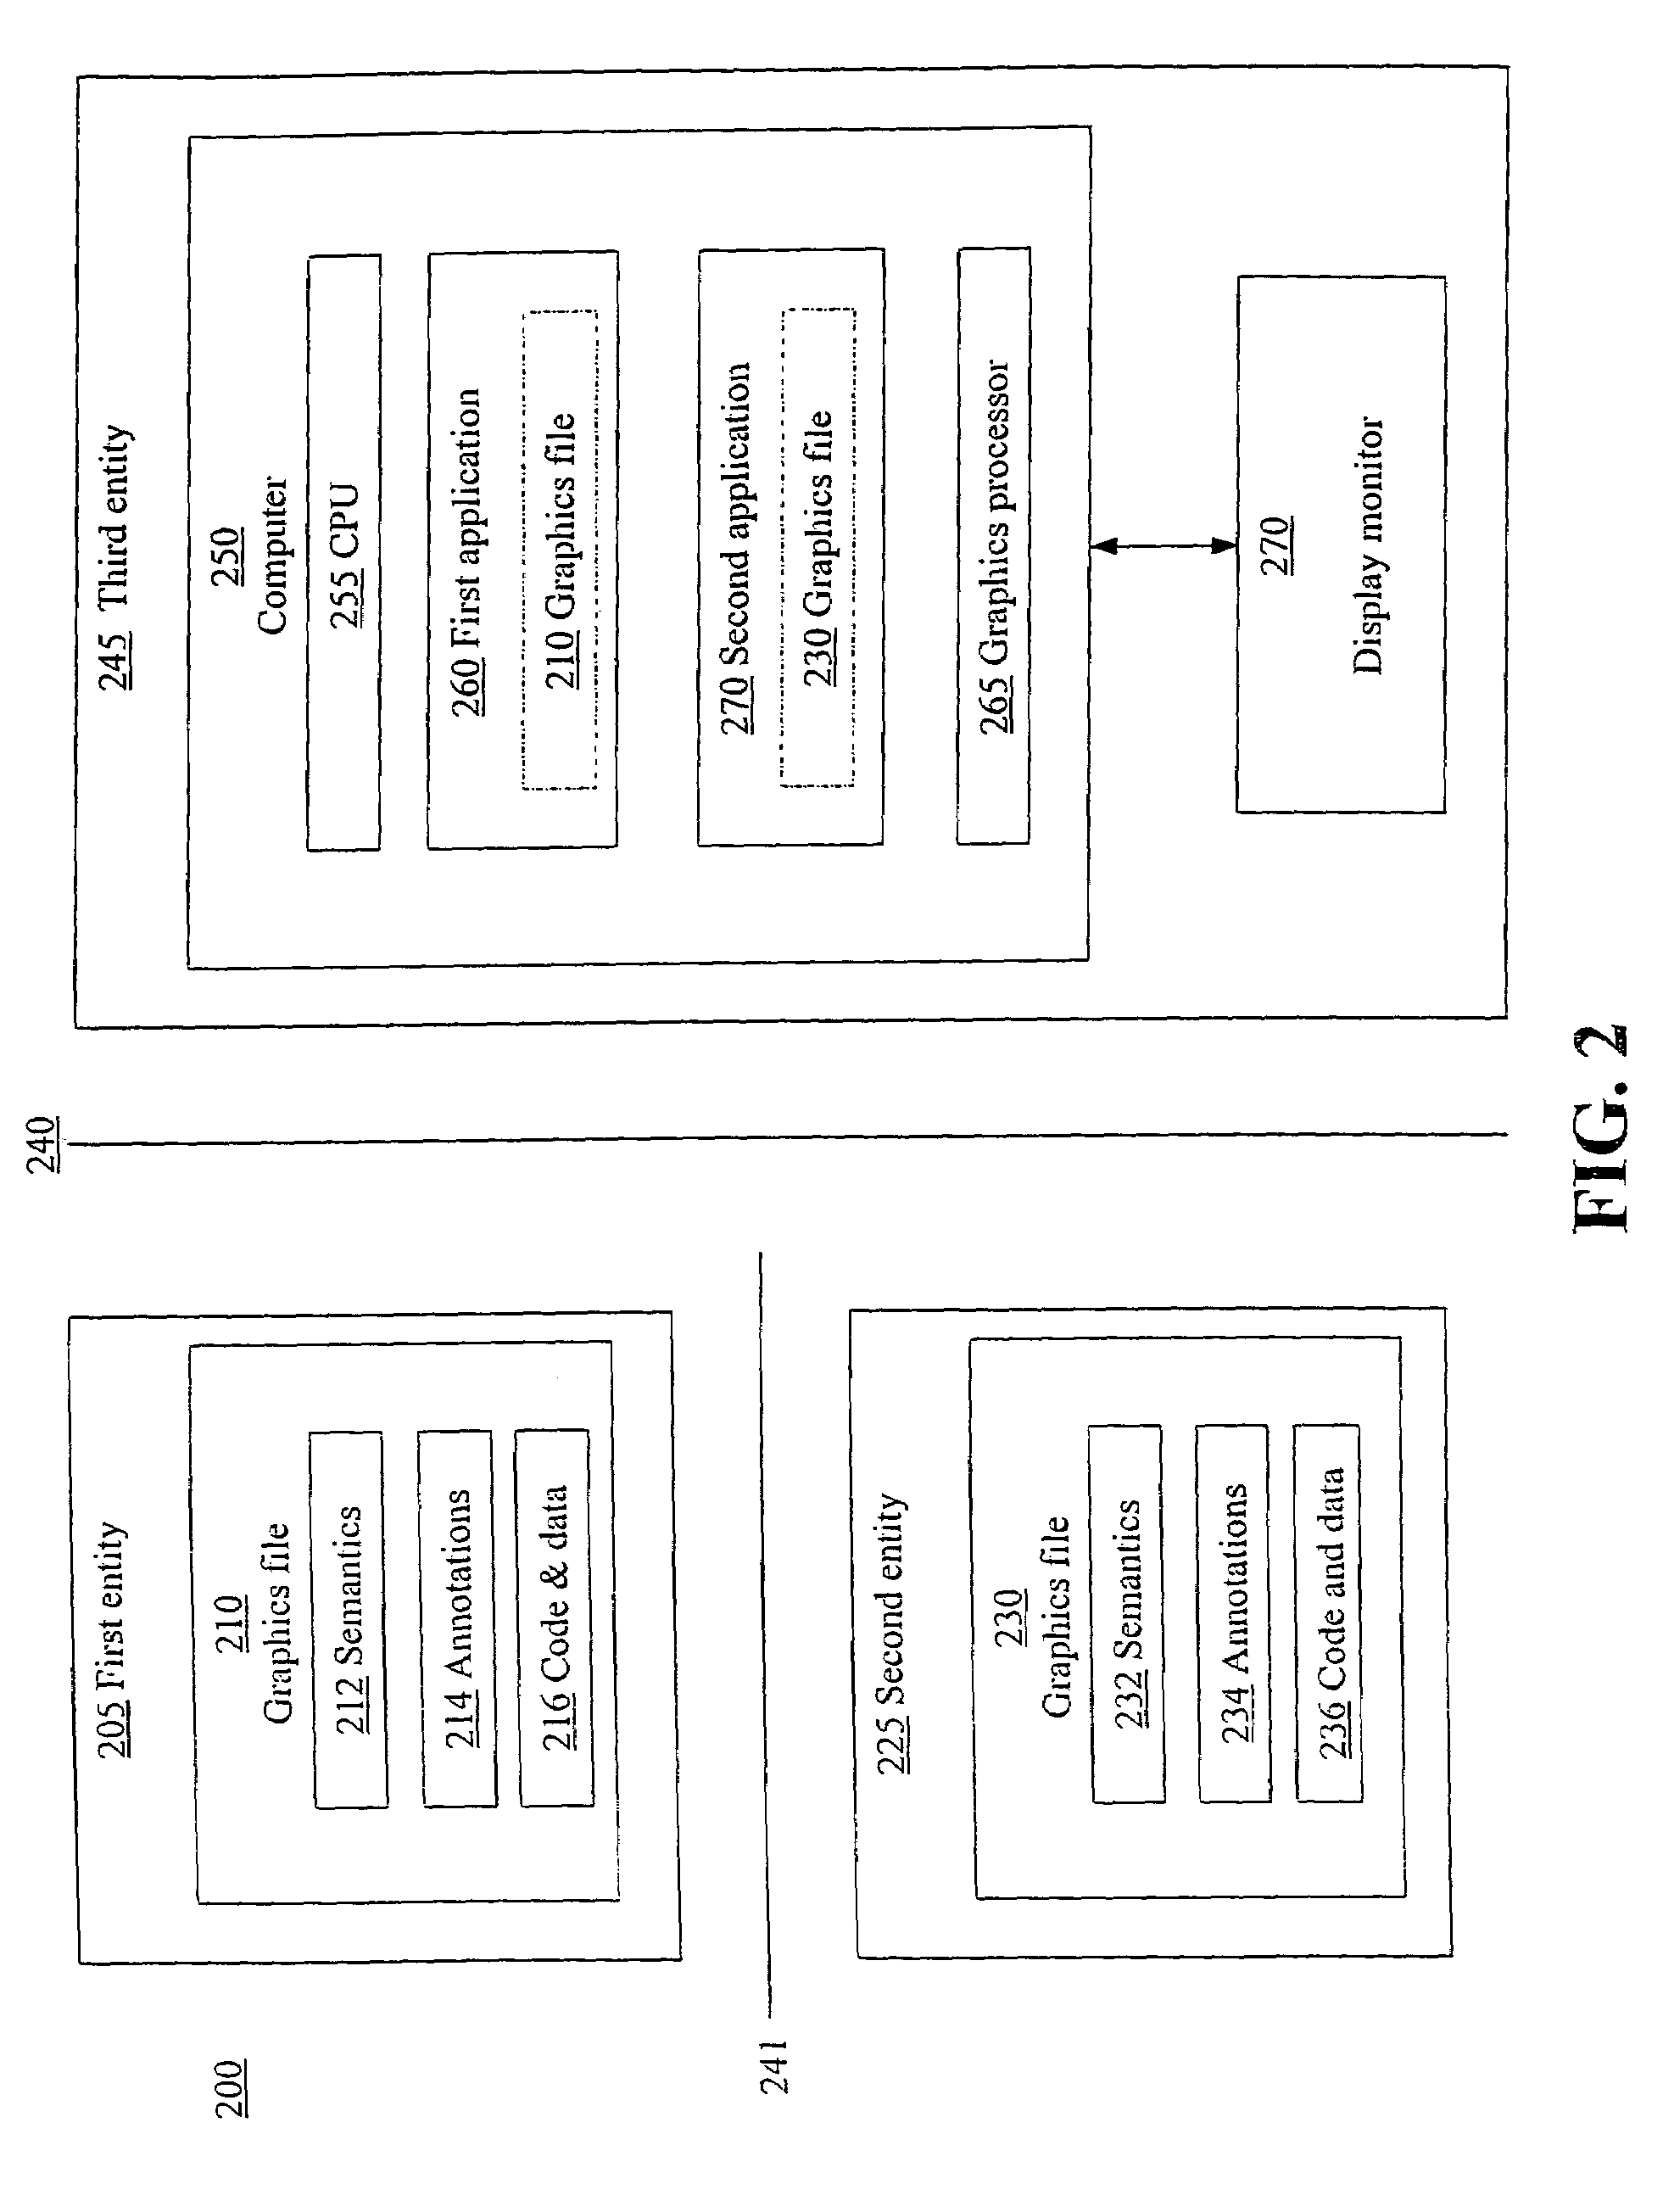 Standard graphics specification and data binding